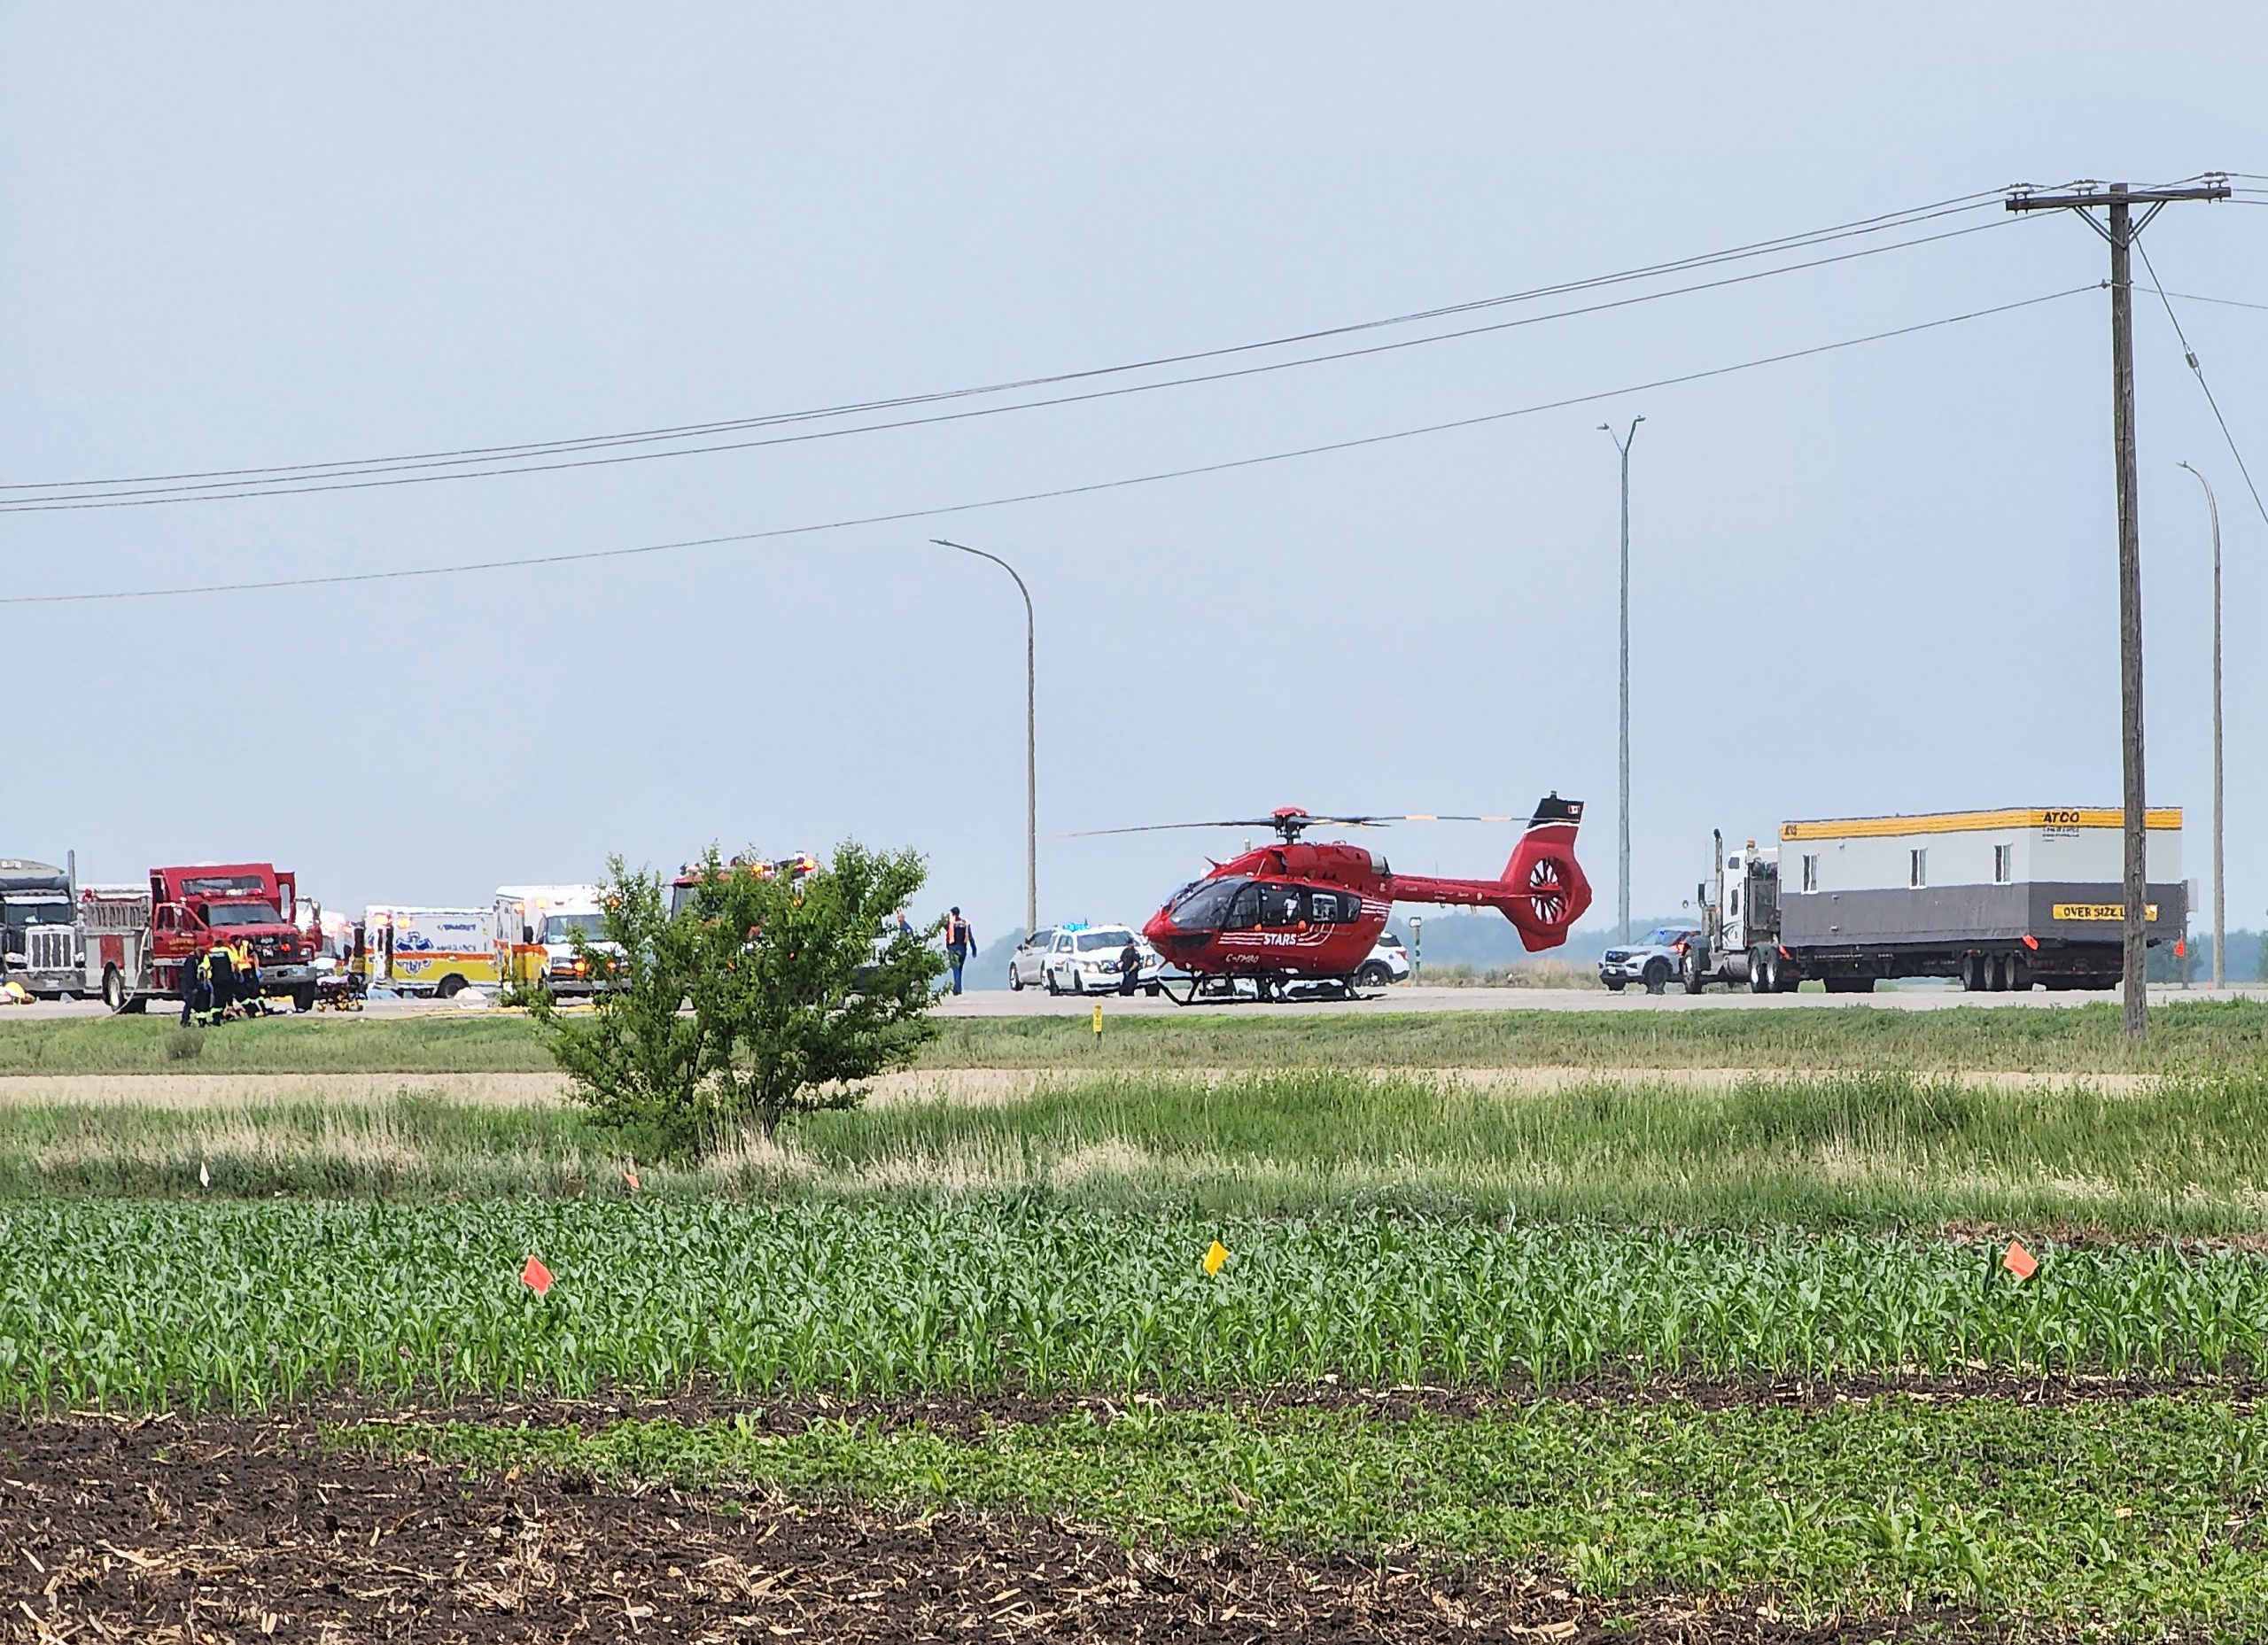 A crash, as shown in this handout image provided by Nirmesh Vadera, has closed a section of the Trans-Canada Highway near Carberry, Manitoba on Thursday June 15, 2023.